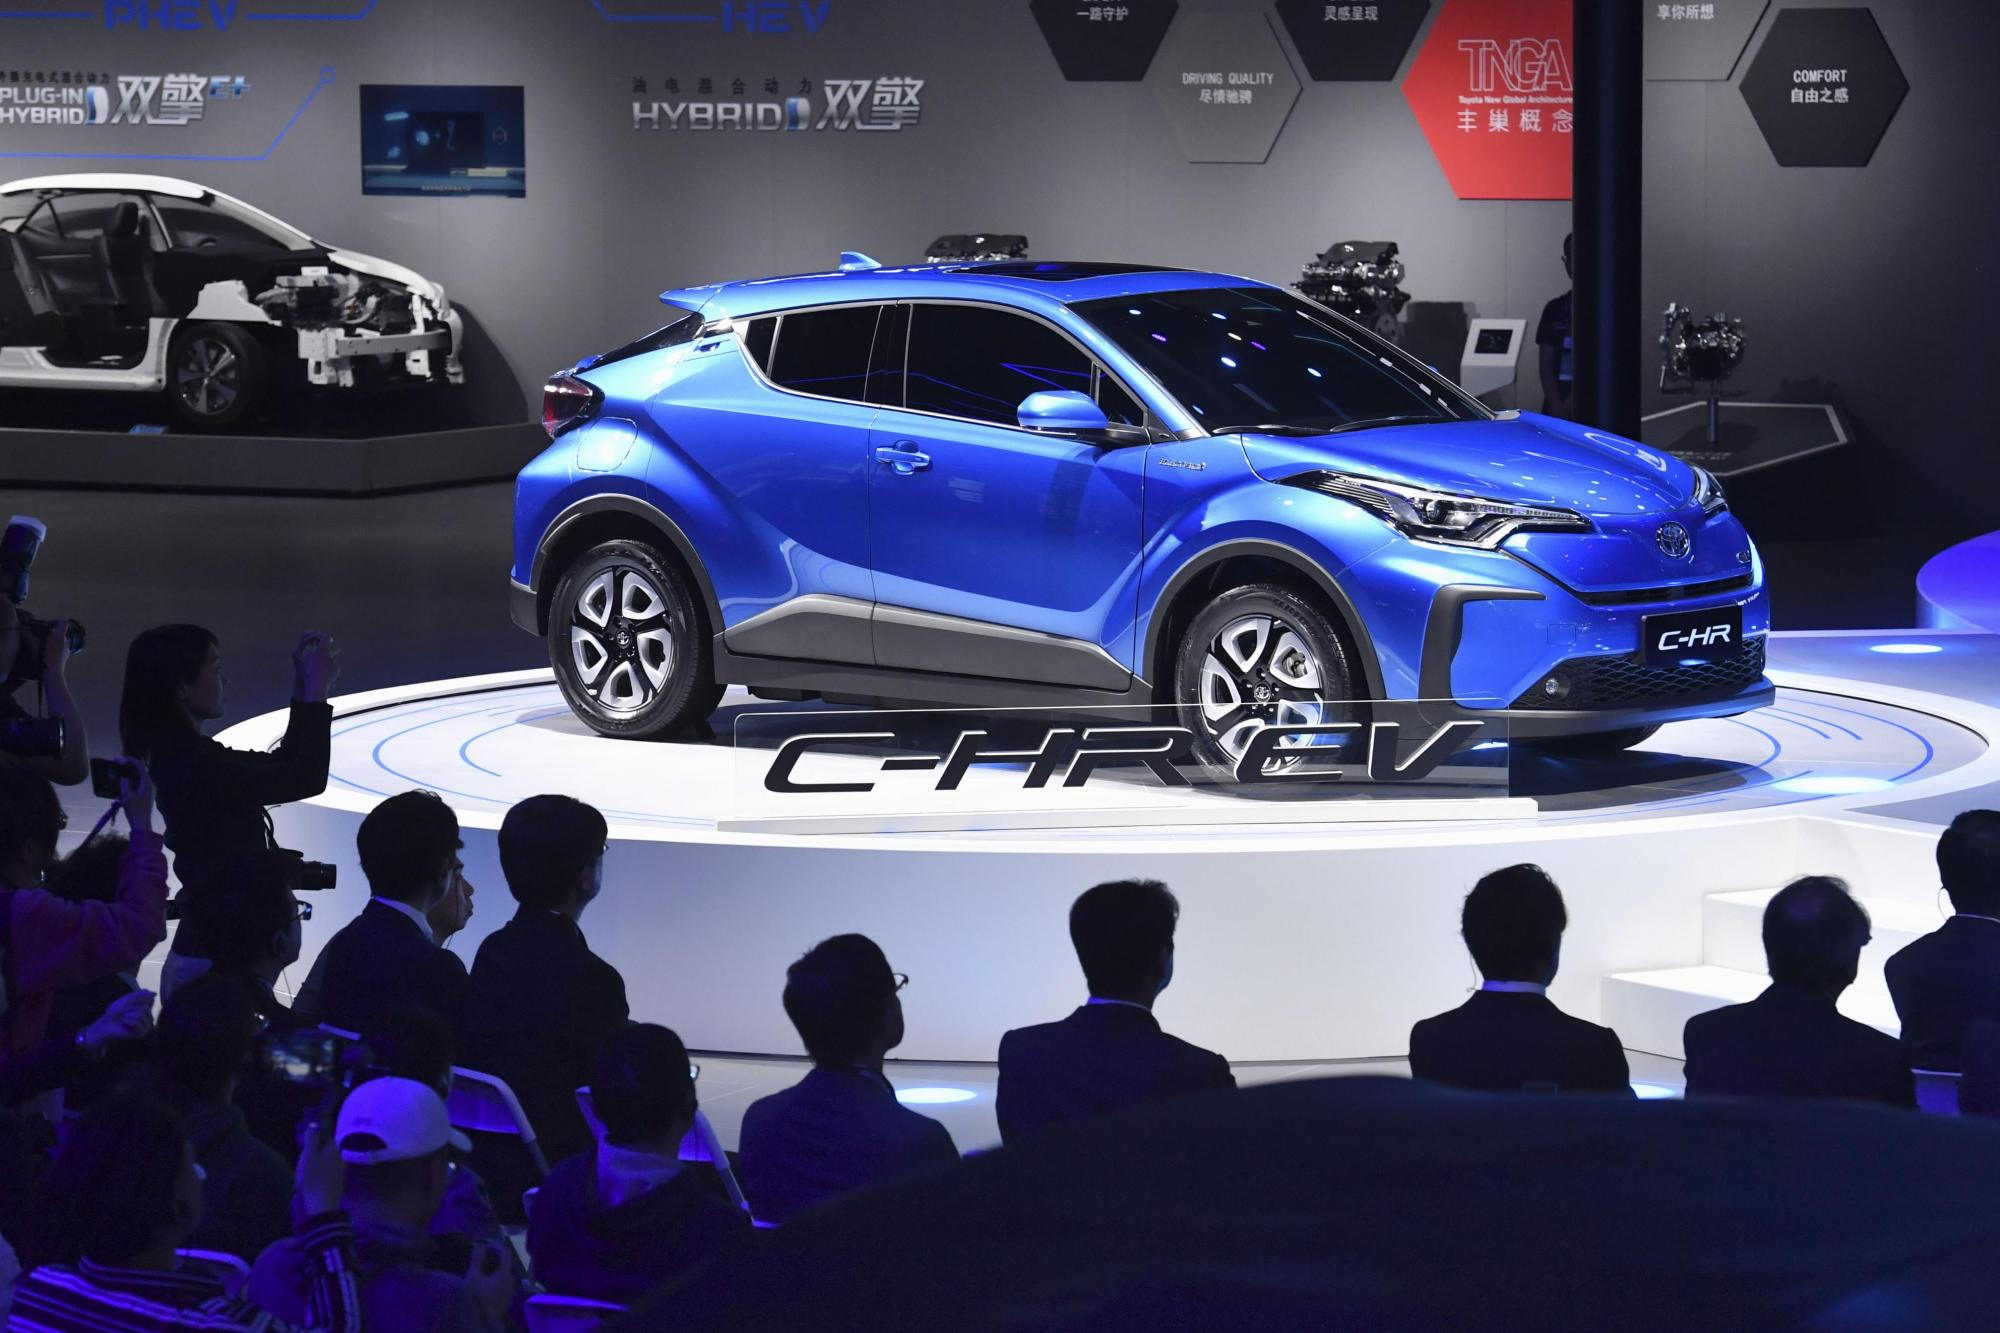 Toyota Motor Corp. unveils the C-HR electric SUV model at the International Automobile and Manufacturing Technology Exhibition in Shanghai on Tuesday. | KYODO